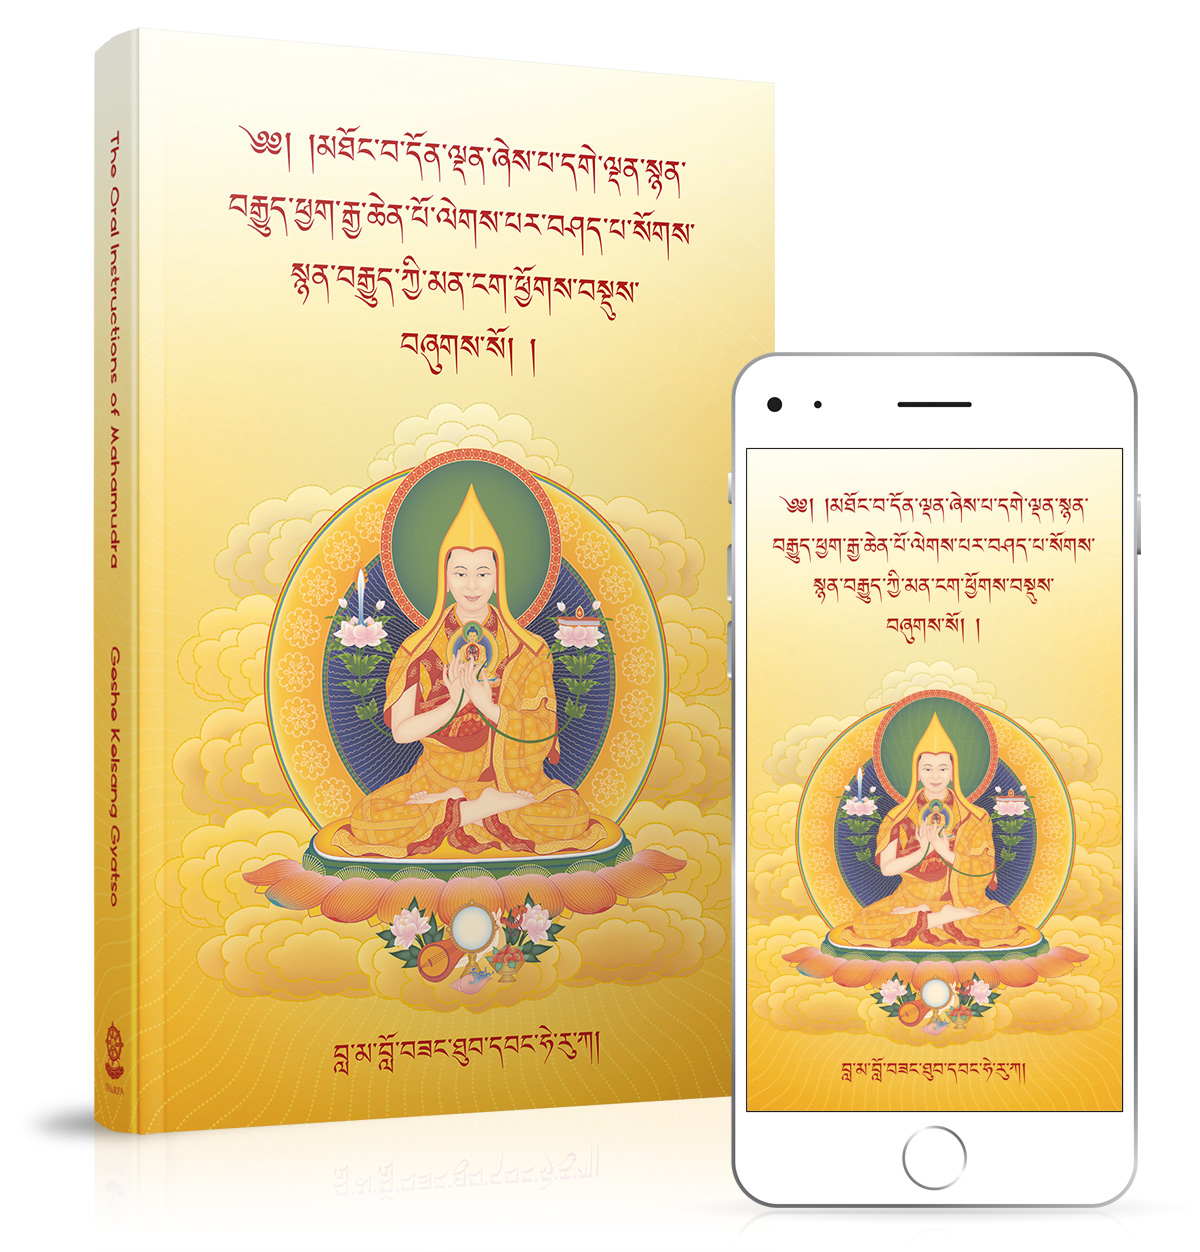 The-Oral-Instructions-of-Mahamudra_TIBETAN_(Third-edition)